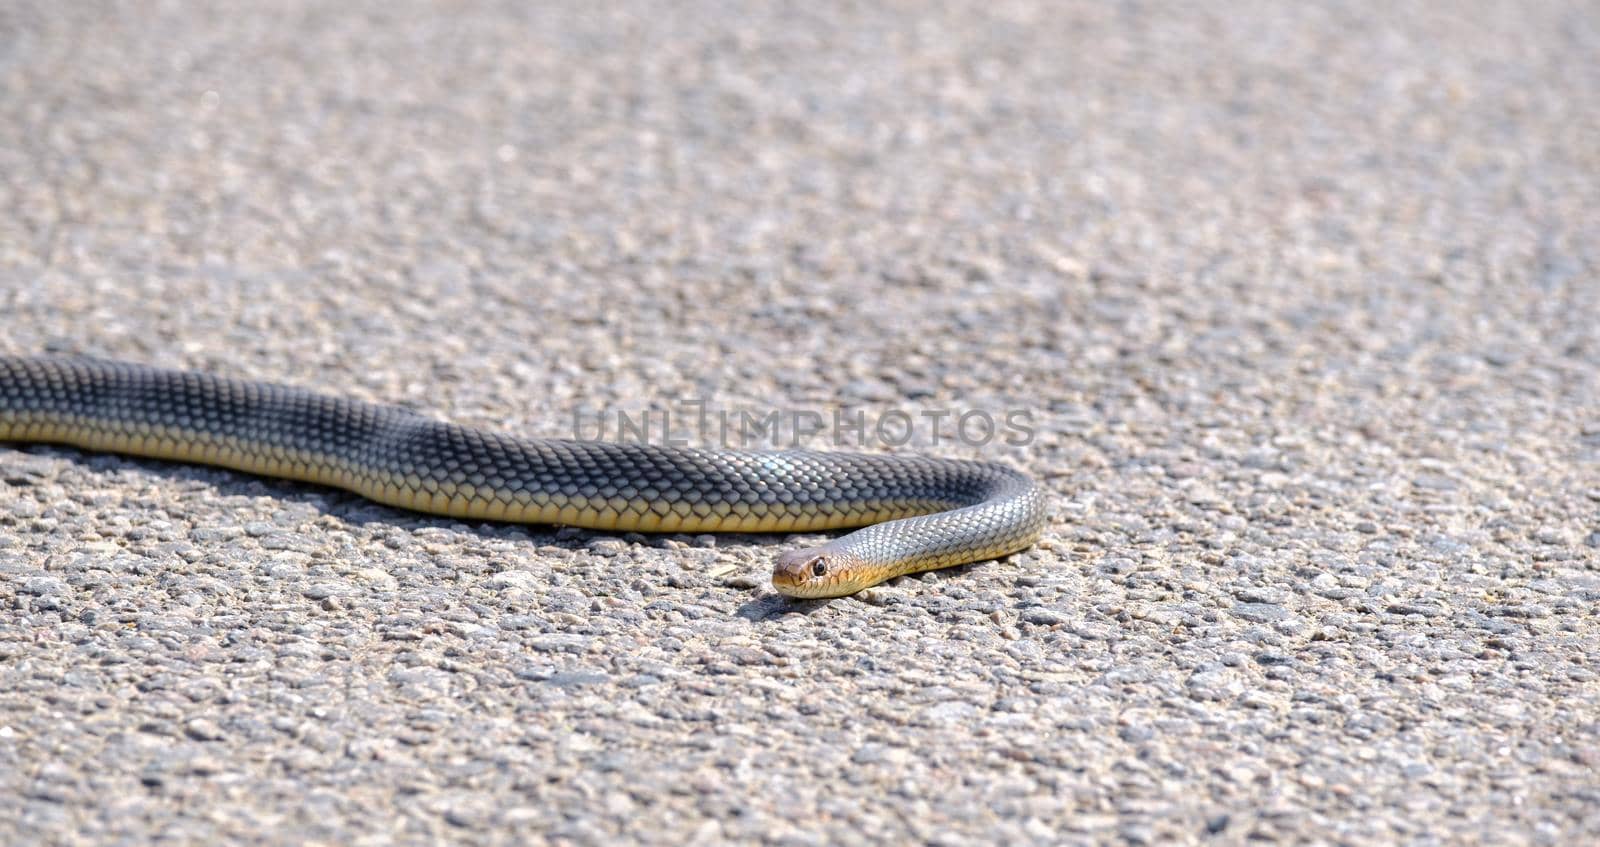 Common Ribbon Snake on the ground. Portrait - close up, small brown snake crawling on the road. by igor010